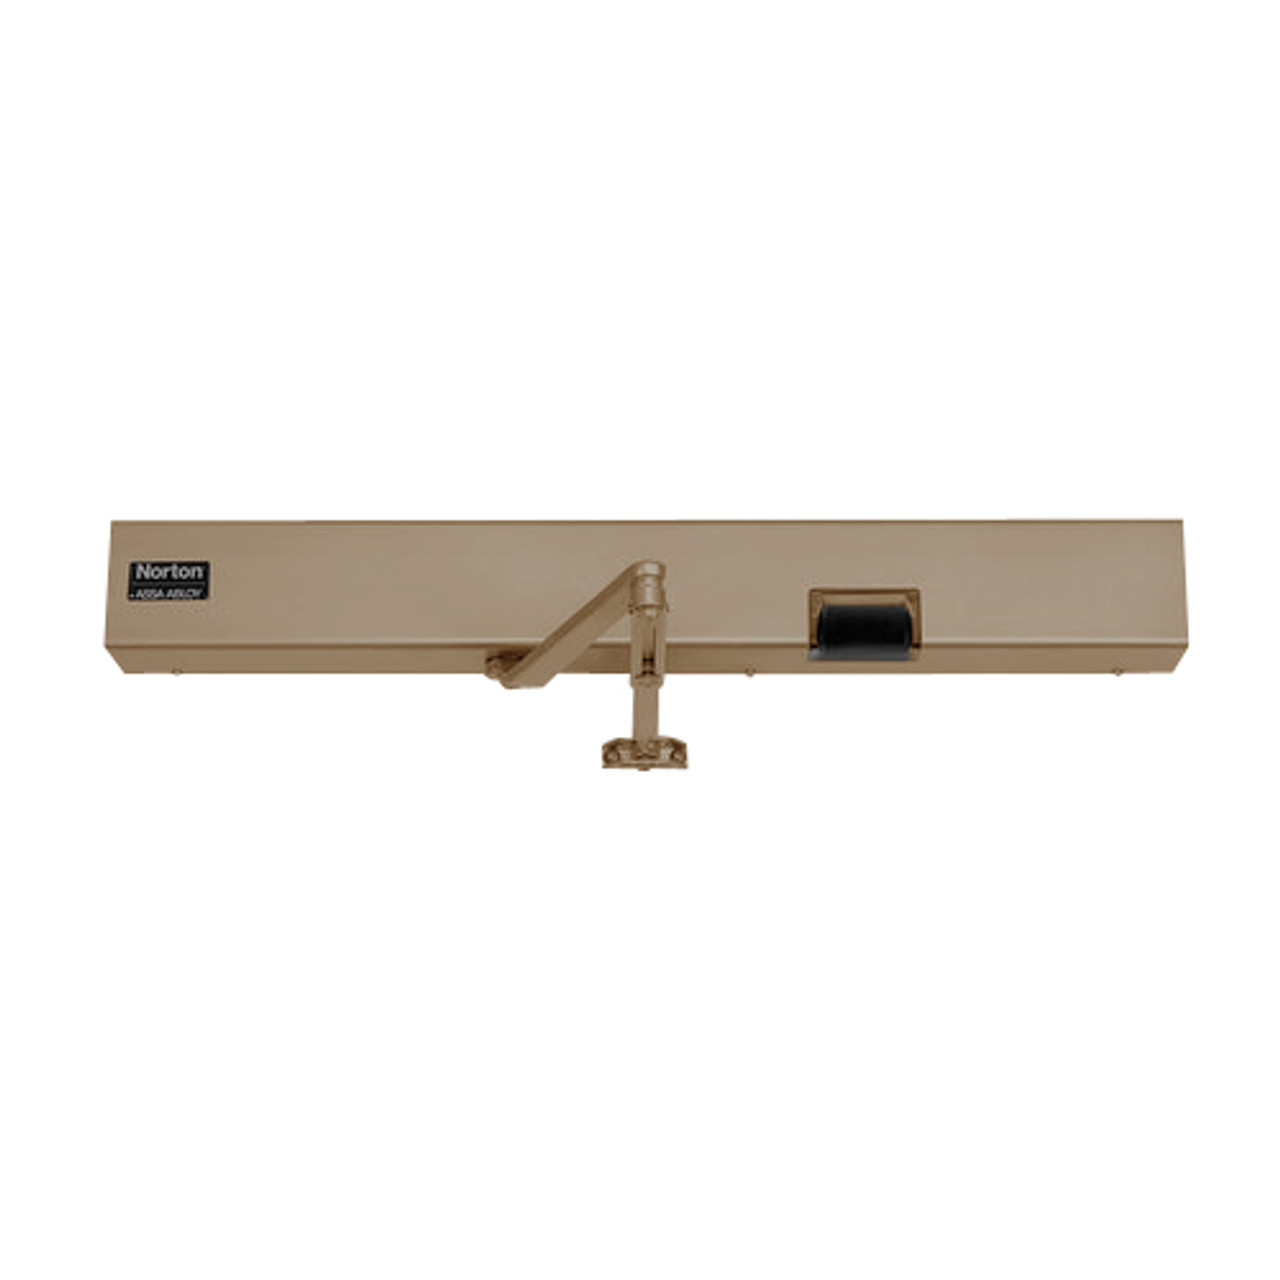 7132SZ-DZ-LH-24VDC-691 Norton 7100SZ Series Safe Zone Multi-Point Closer/Holder with Motion Sensor and Push Side Double Lever 13-1/2 inch Main Arm in Dull Bronze Finish